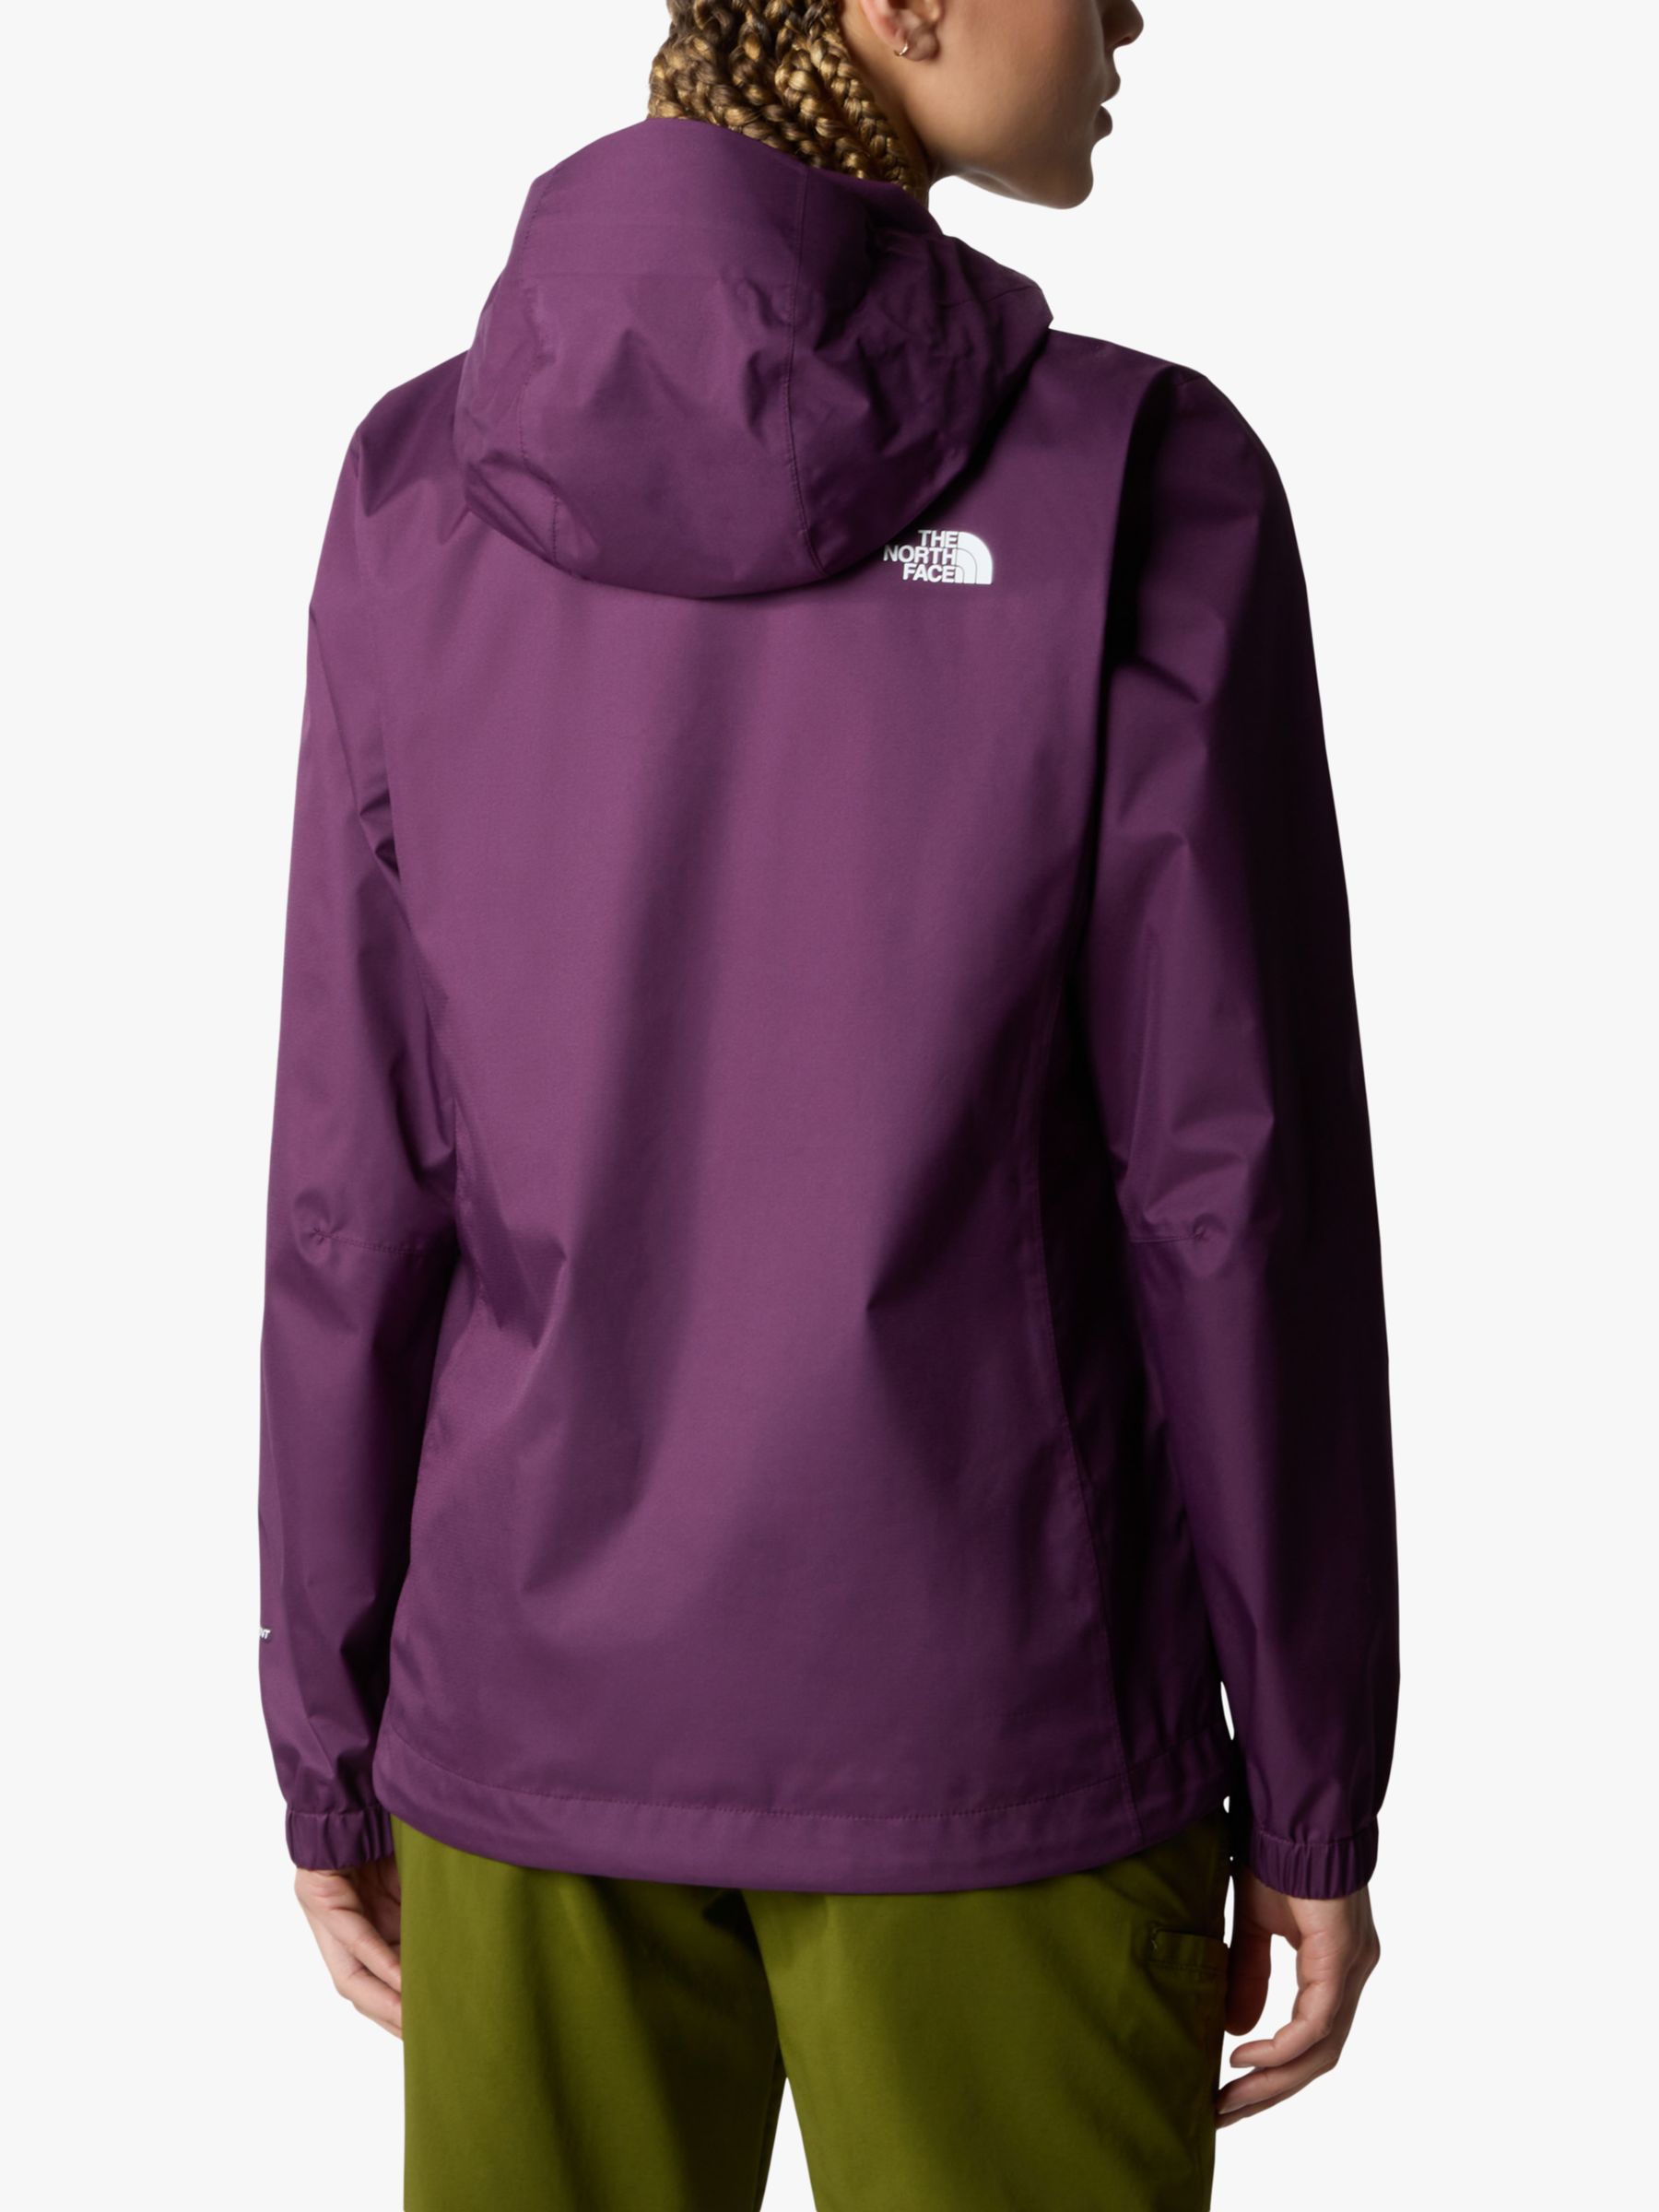 Buy The North Face Women's Quest Hooded Jacket, Purple Online at johnlewis.com